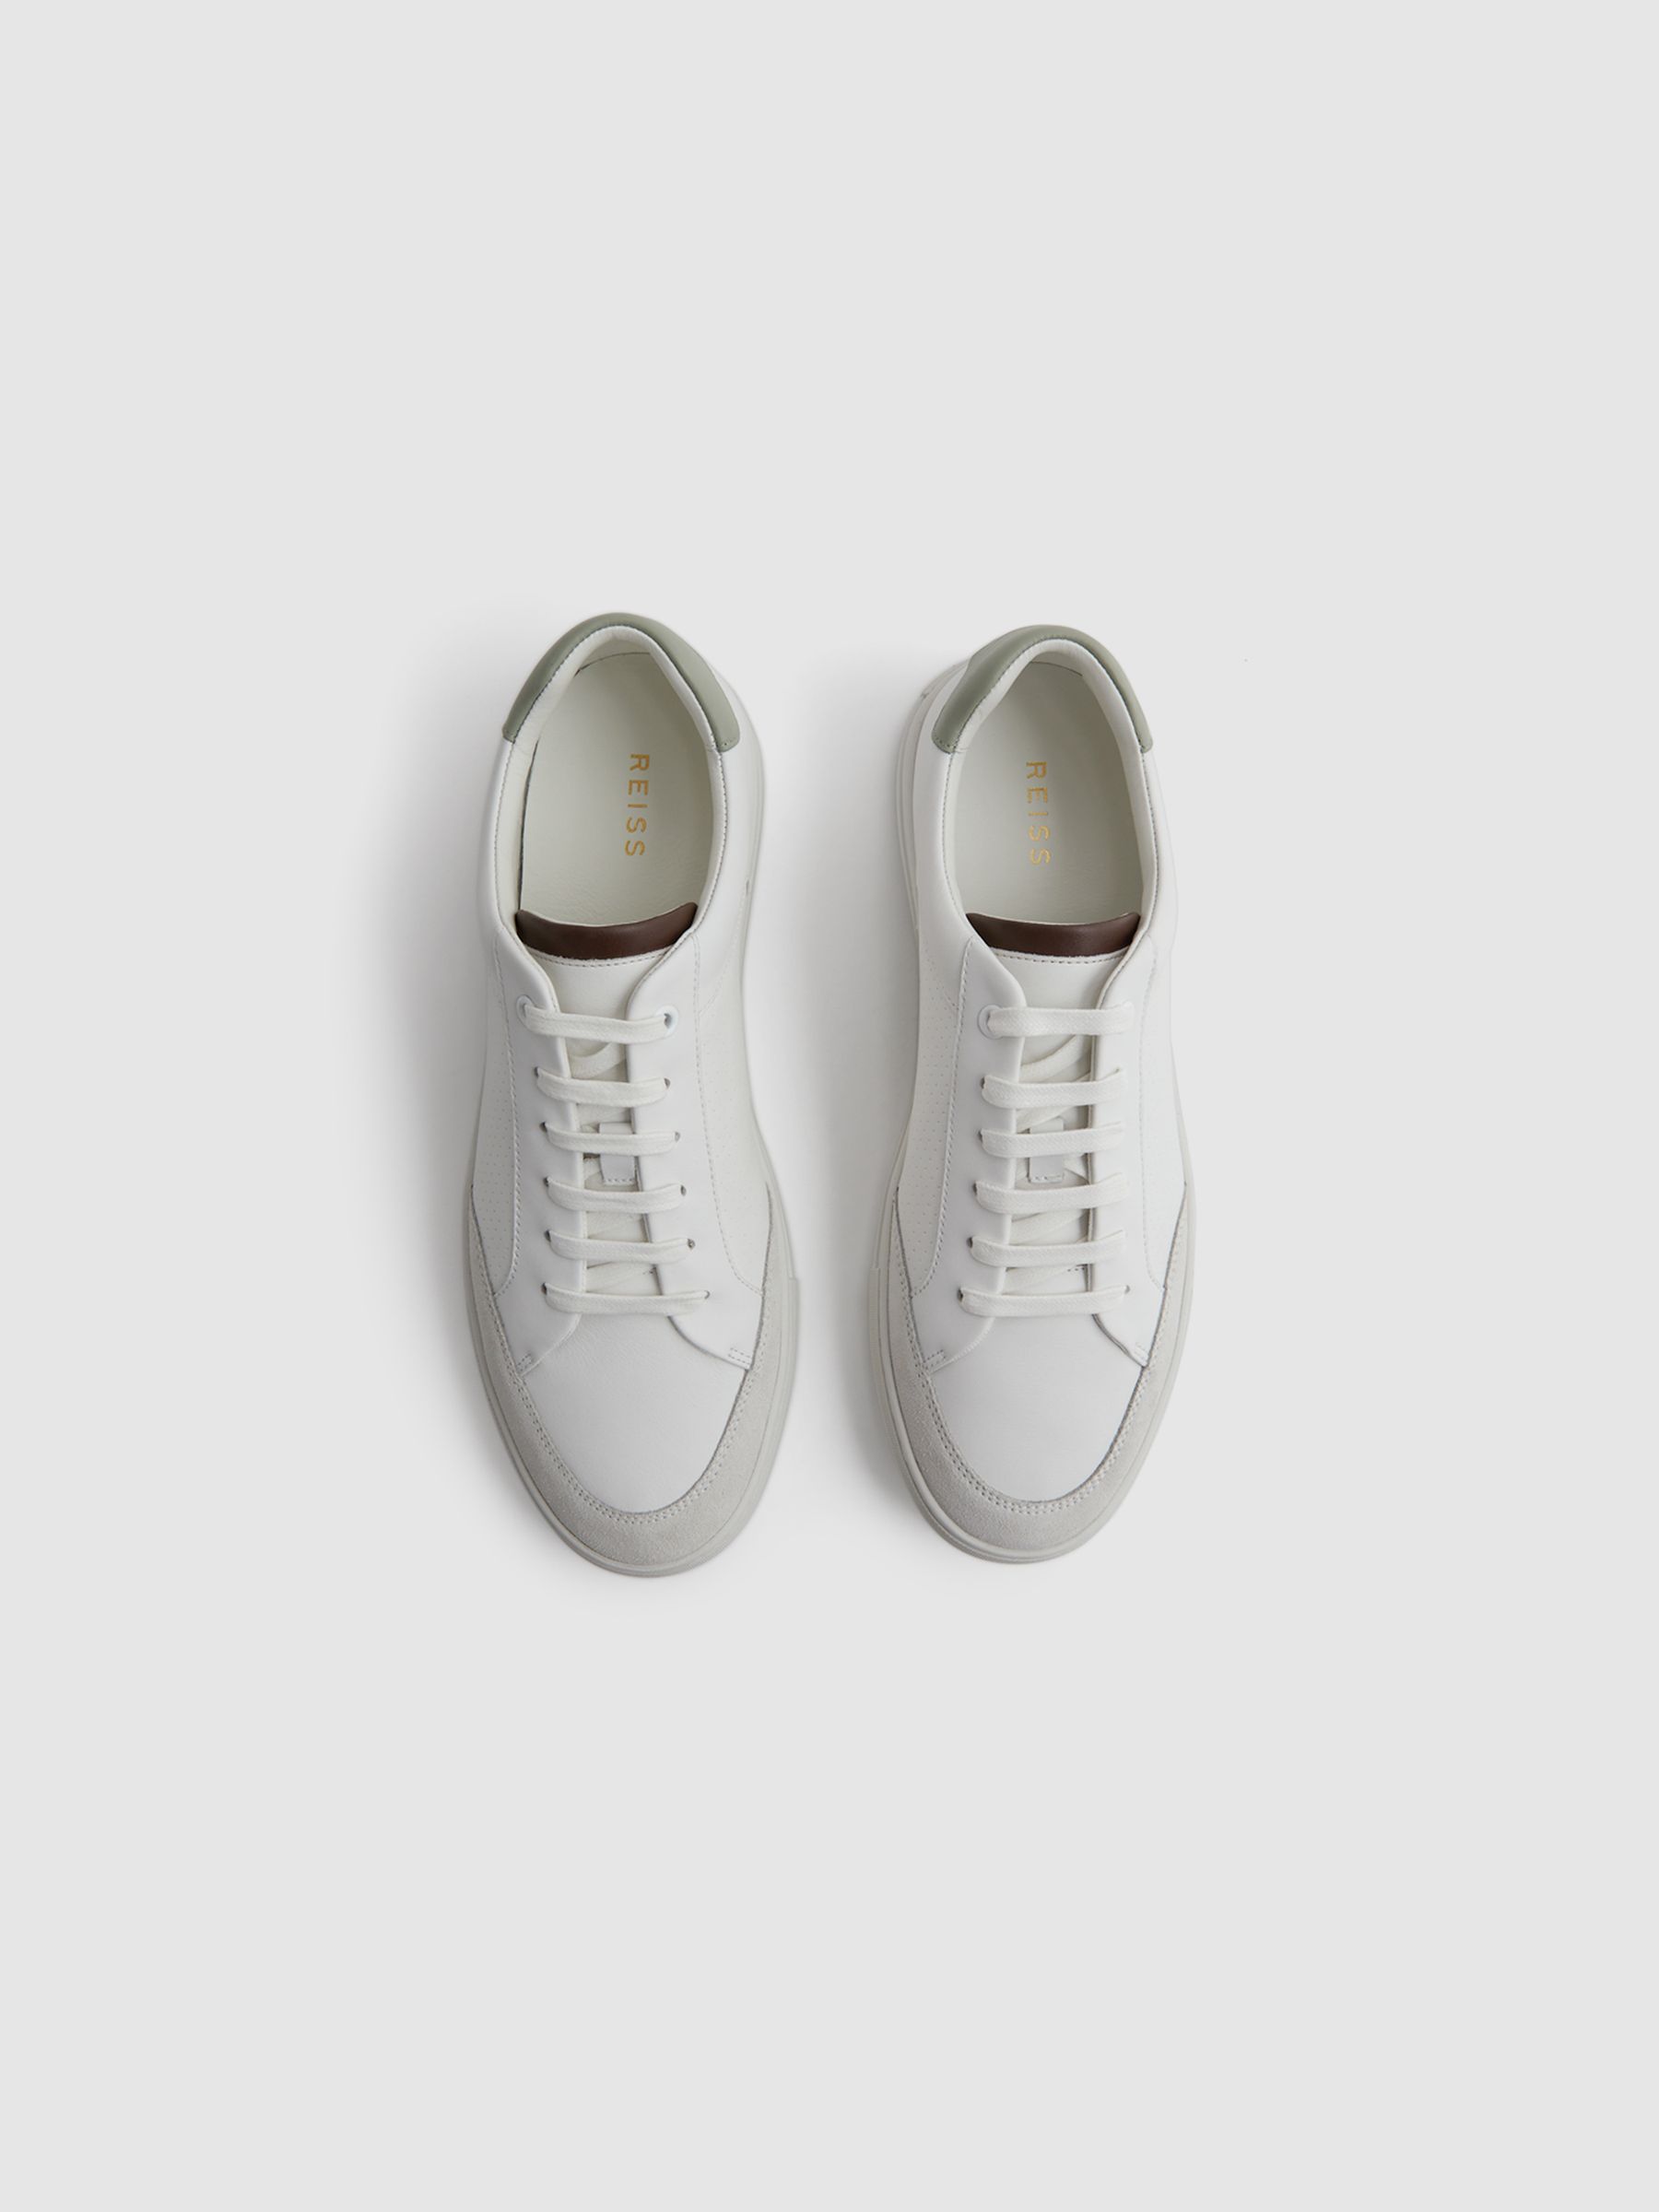 Reiss Ashley Perf Leather Contrast Sole Trainers - REISS